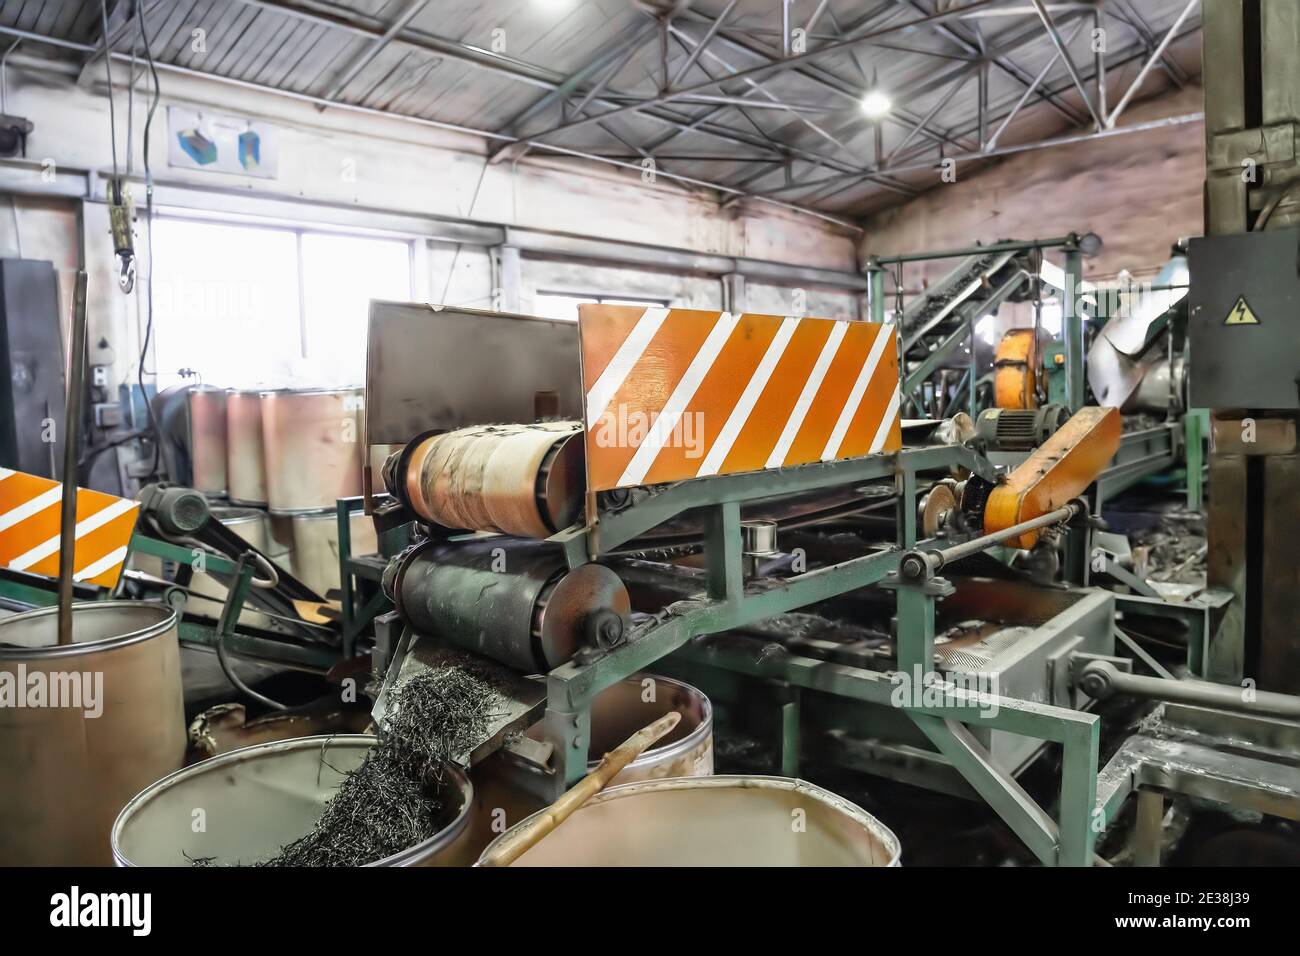 Rubber waste recycling. Industrial conveyor line with cut used car tires. Stock Photo